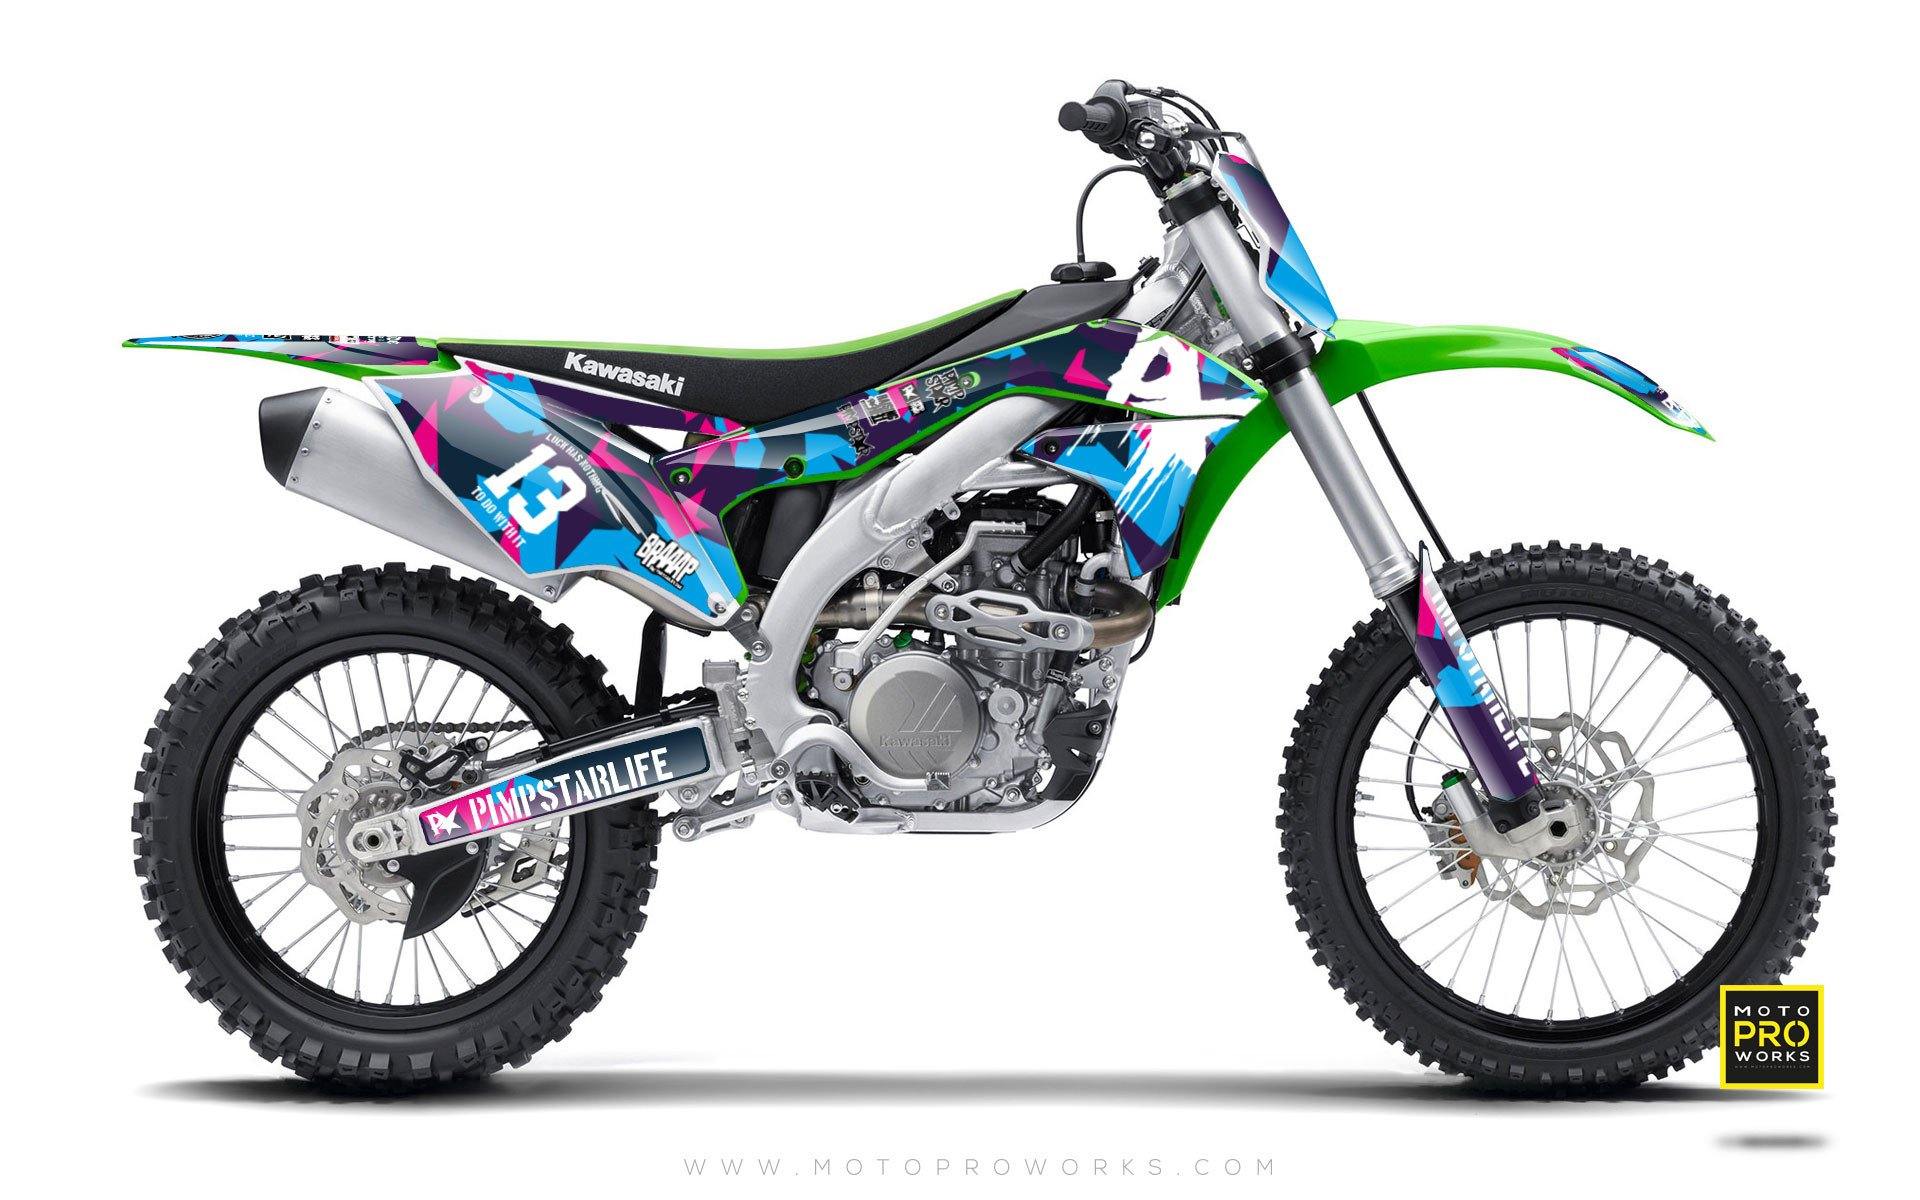 Kawasaki GRAPHIC KIT - "M90" (candy) - MotoProWorks | Decals and Bike Graphic kit